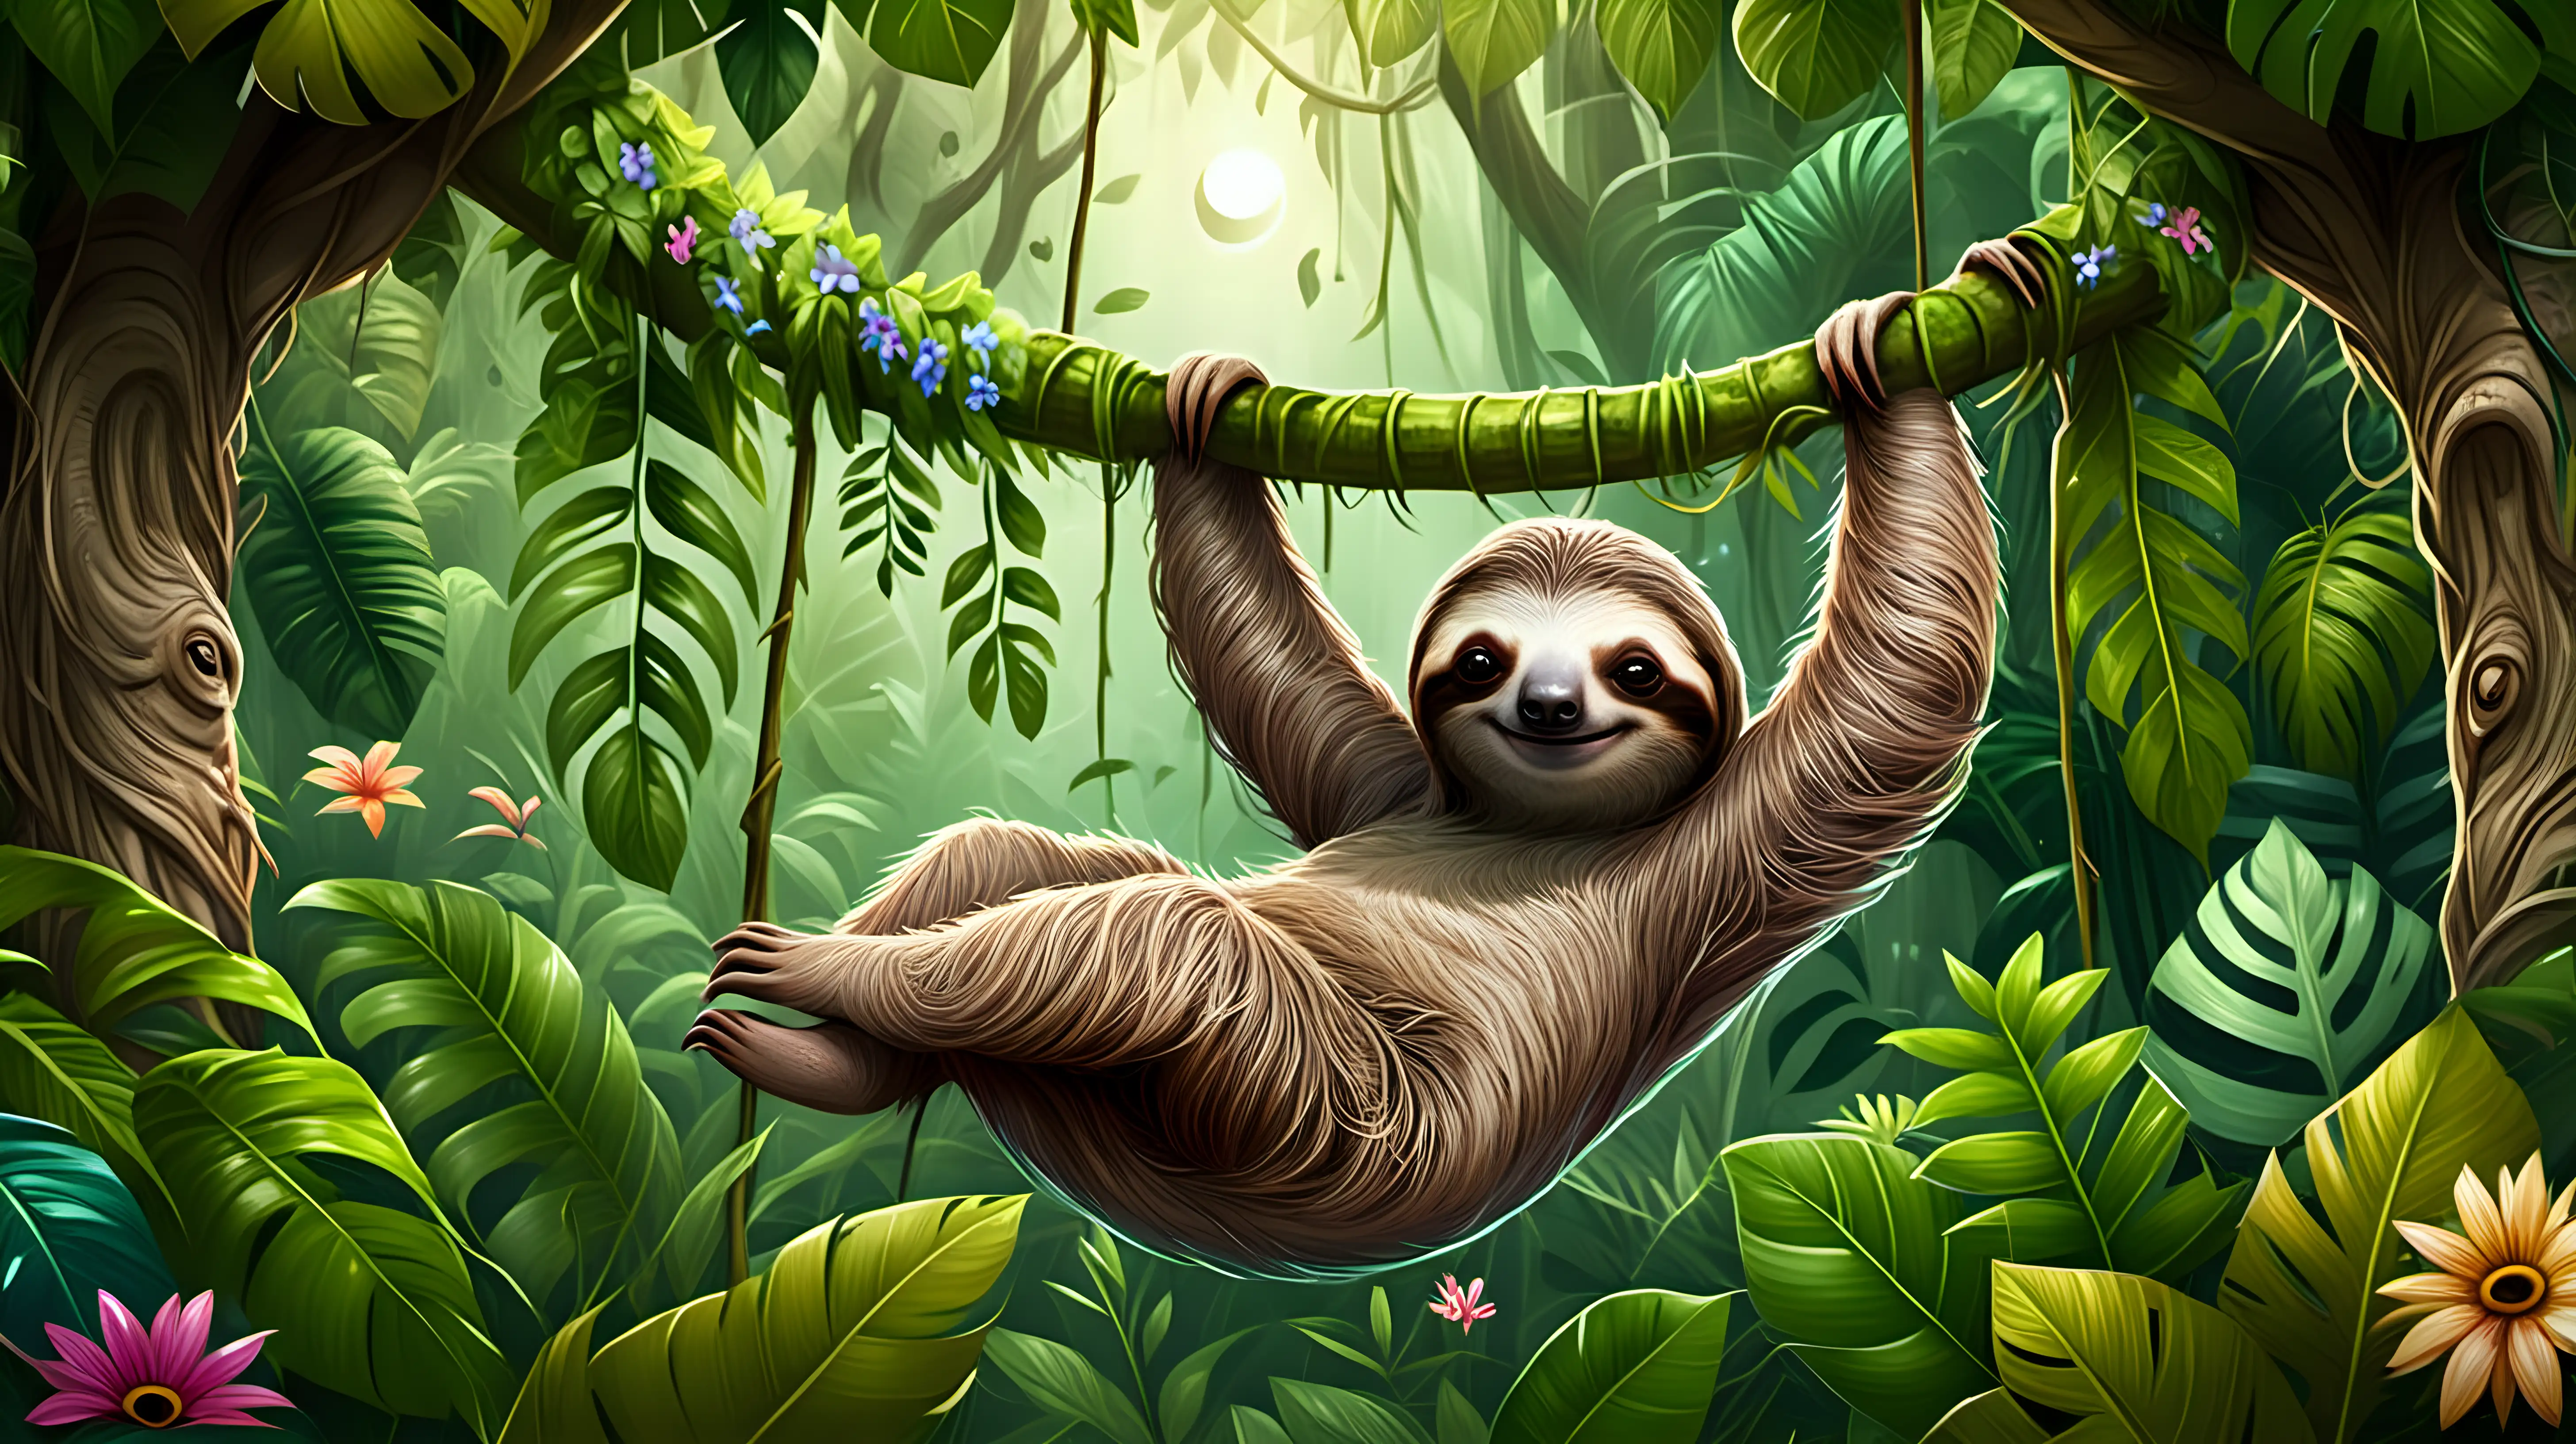 Mystical Jungle Scene Smiley Sloth Hanging from Tree amidst Lush Foliage and Flowers